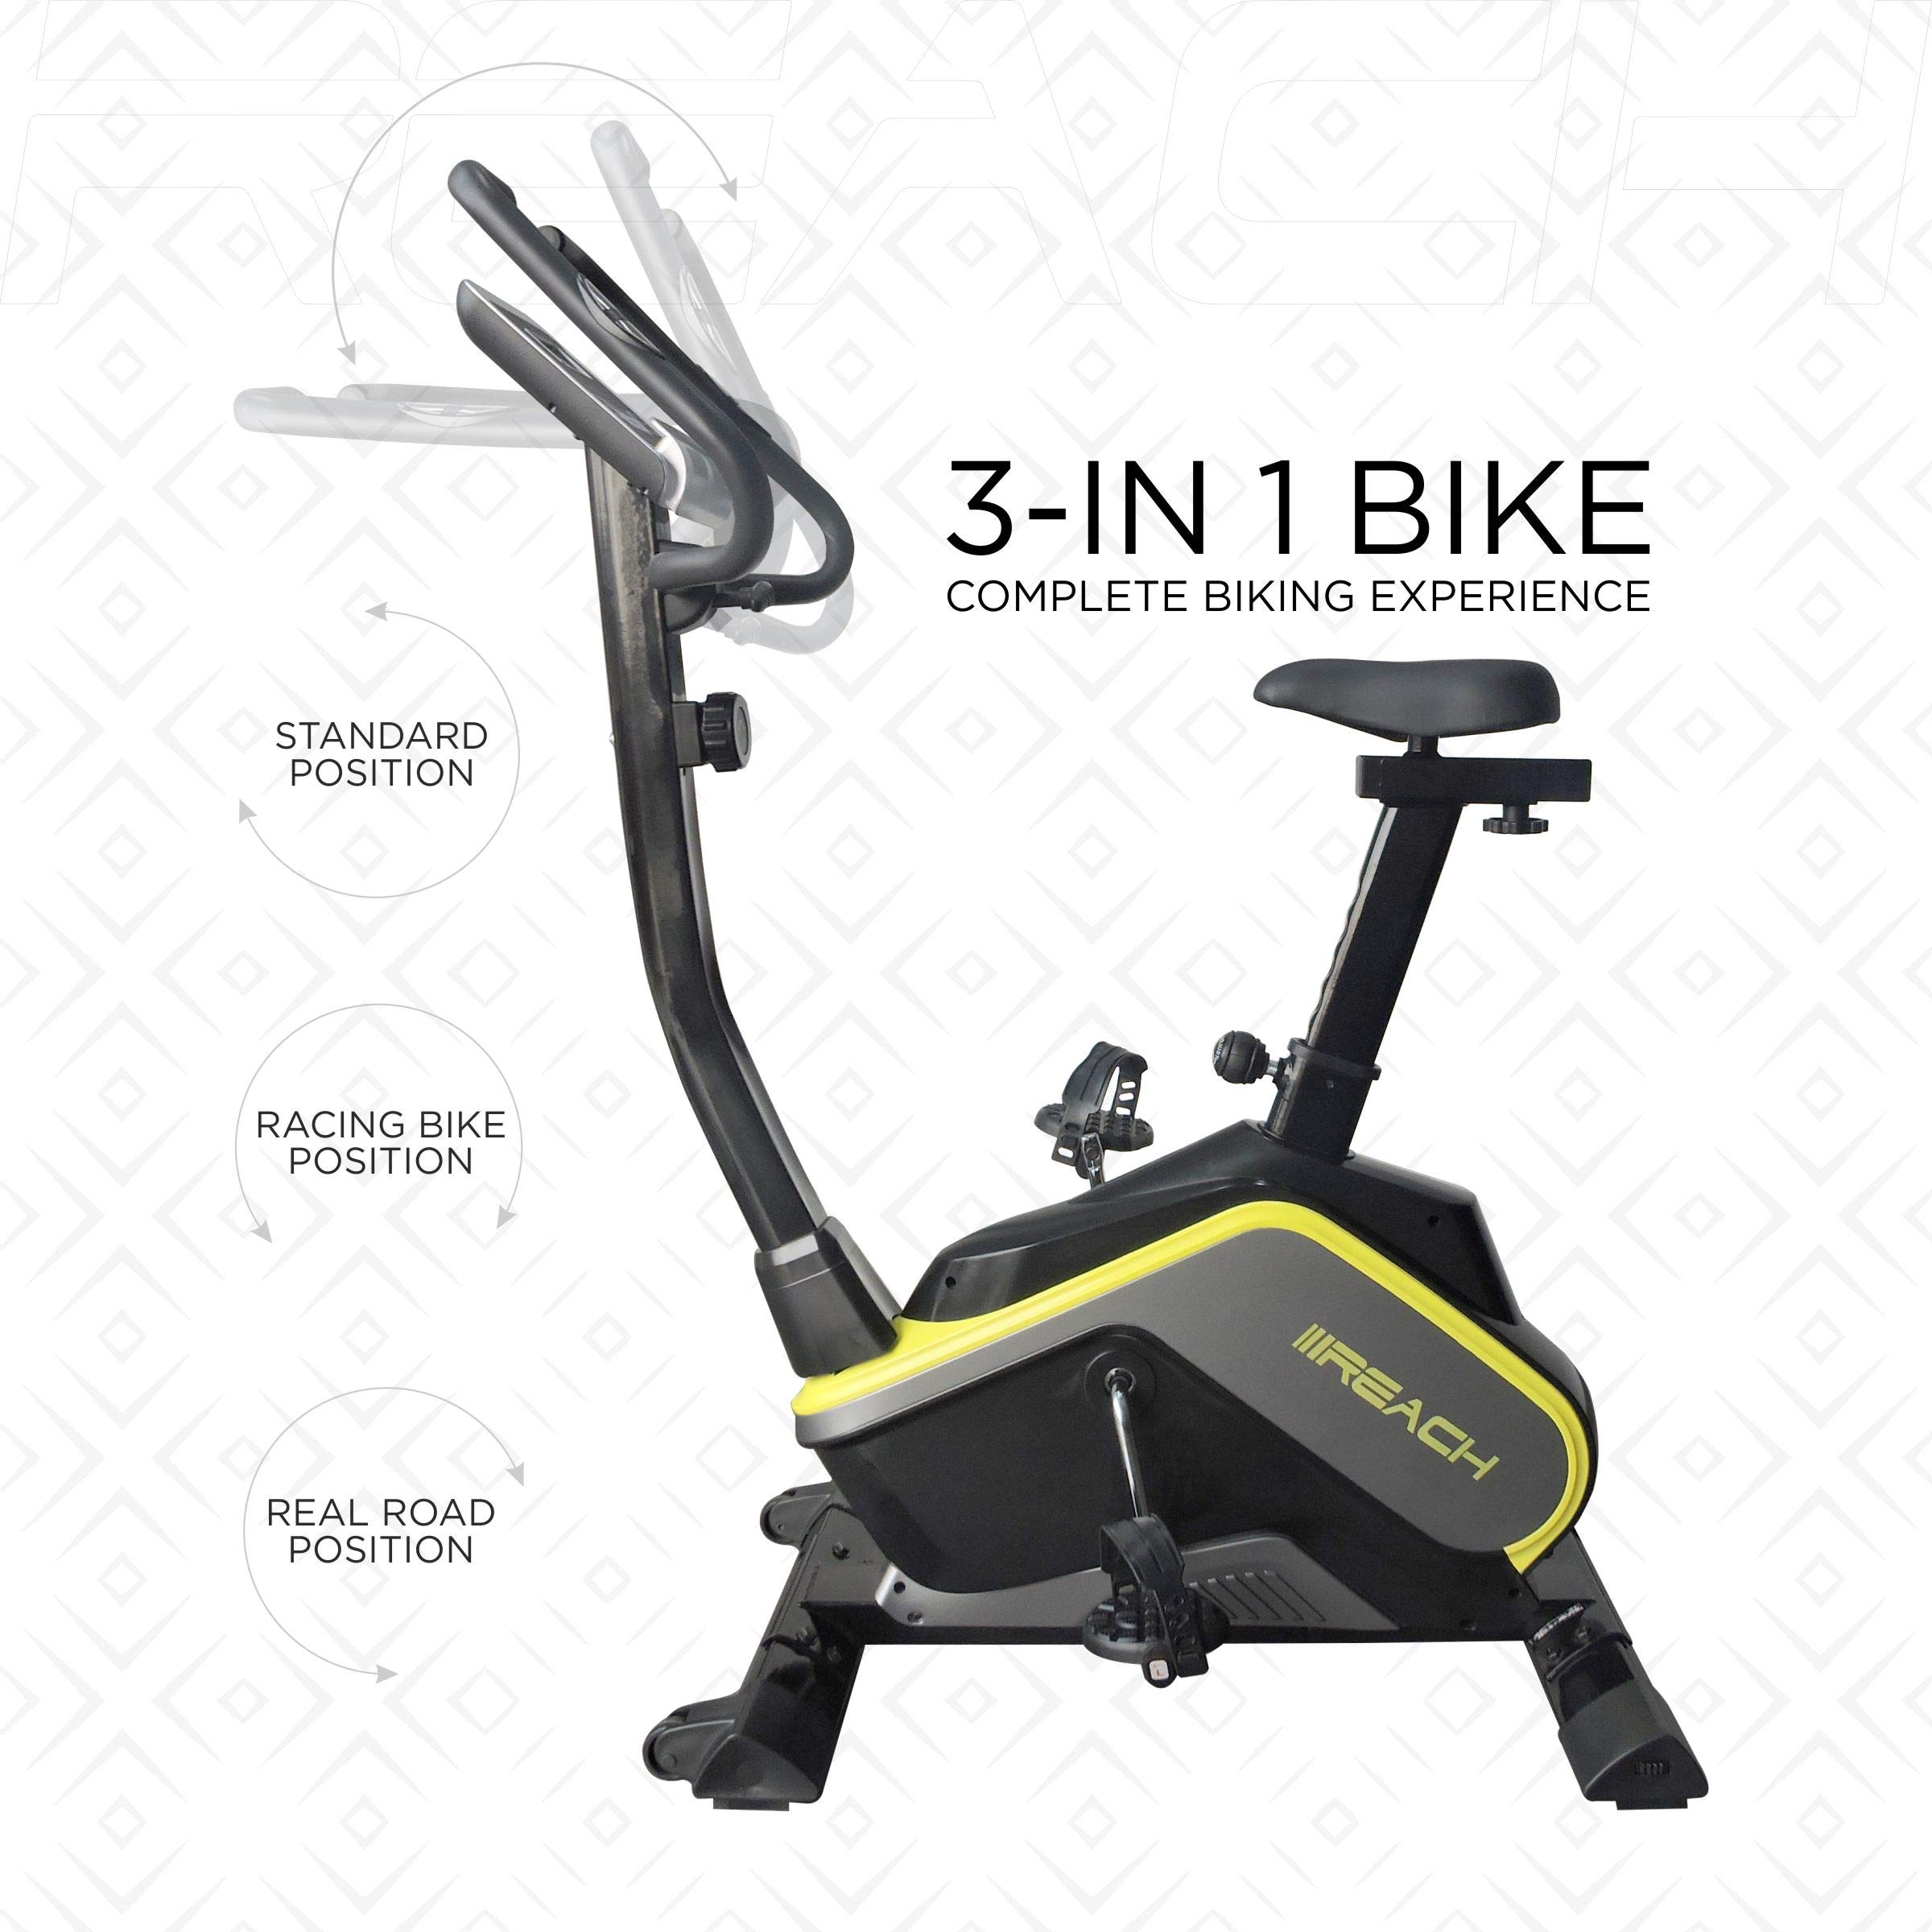 Reach B-400 Magnetic Exercise Cycle with 8 kg Flywheel | Easy on Knees with Adjustable Handles | Electro Magnetic Resistance System suitable for Men & Women of all ages